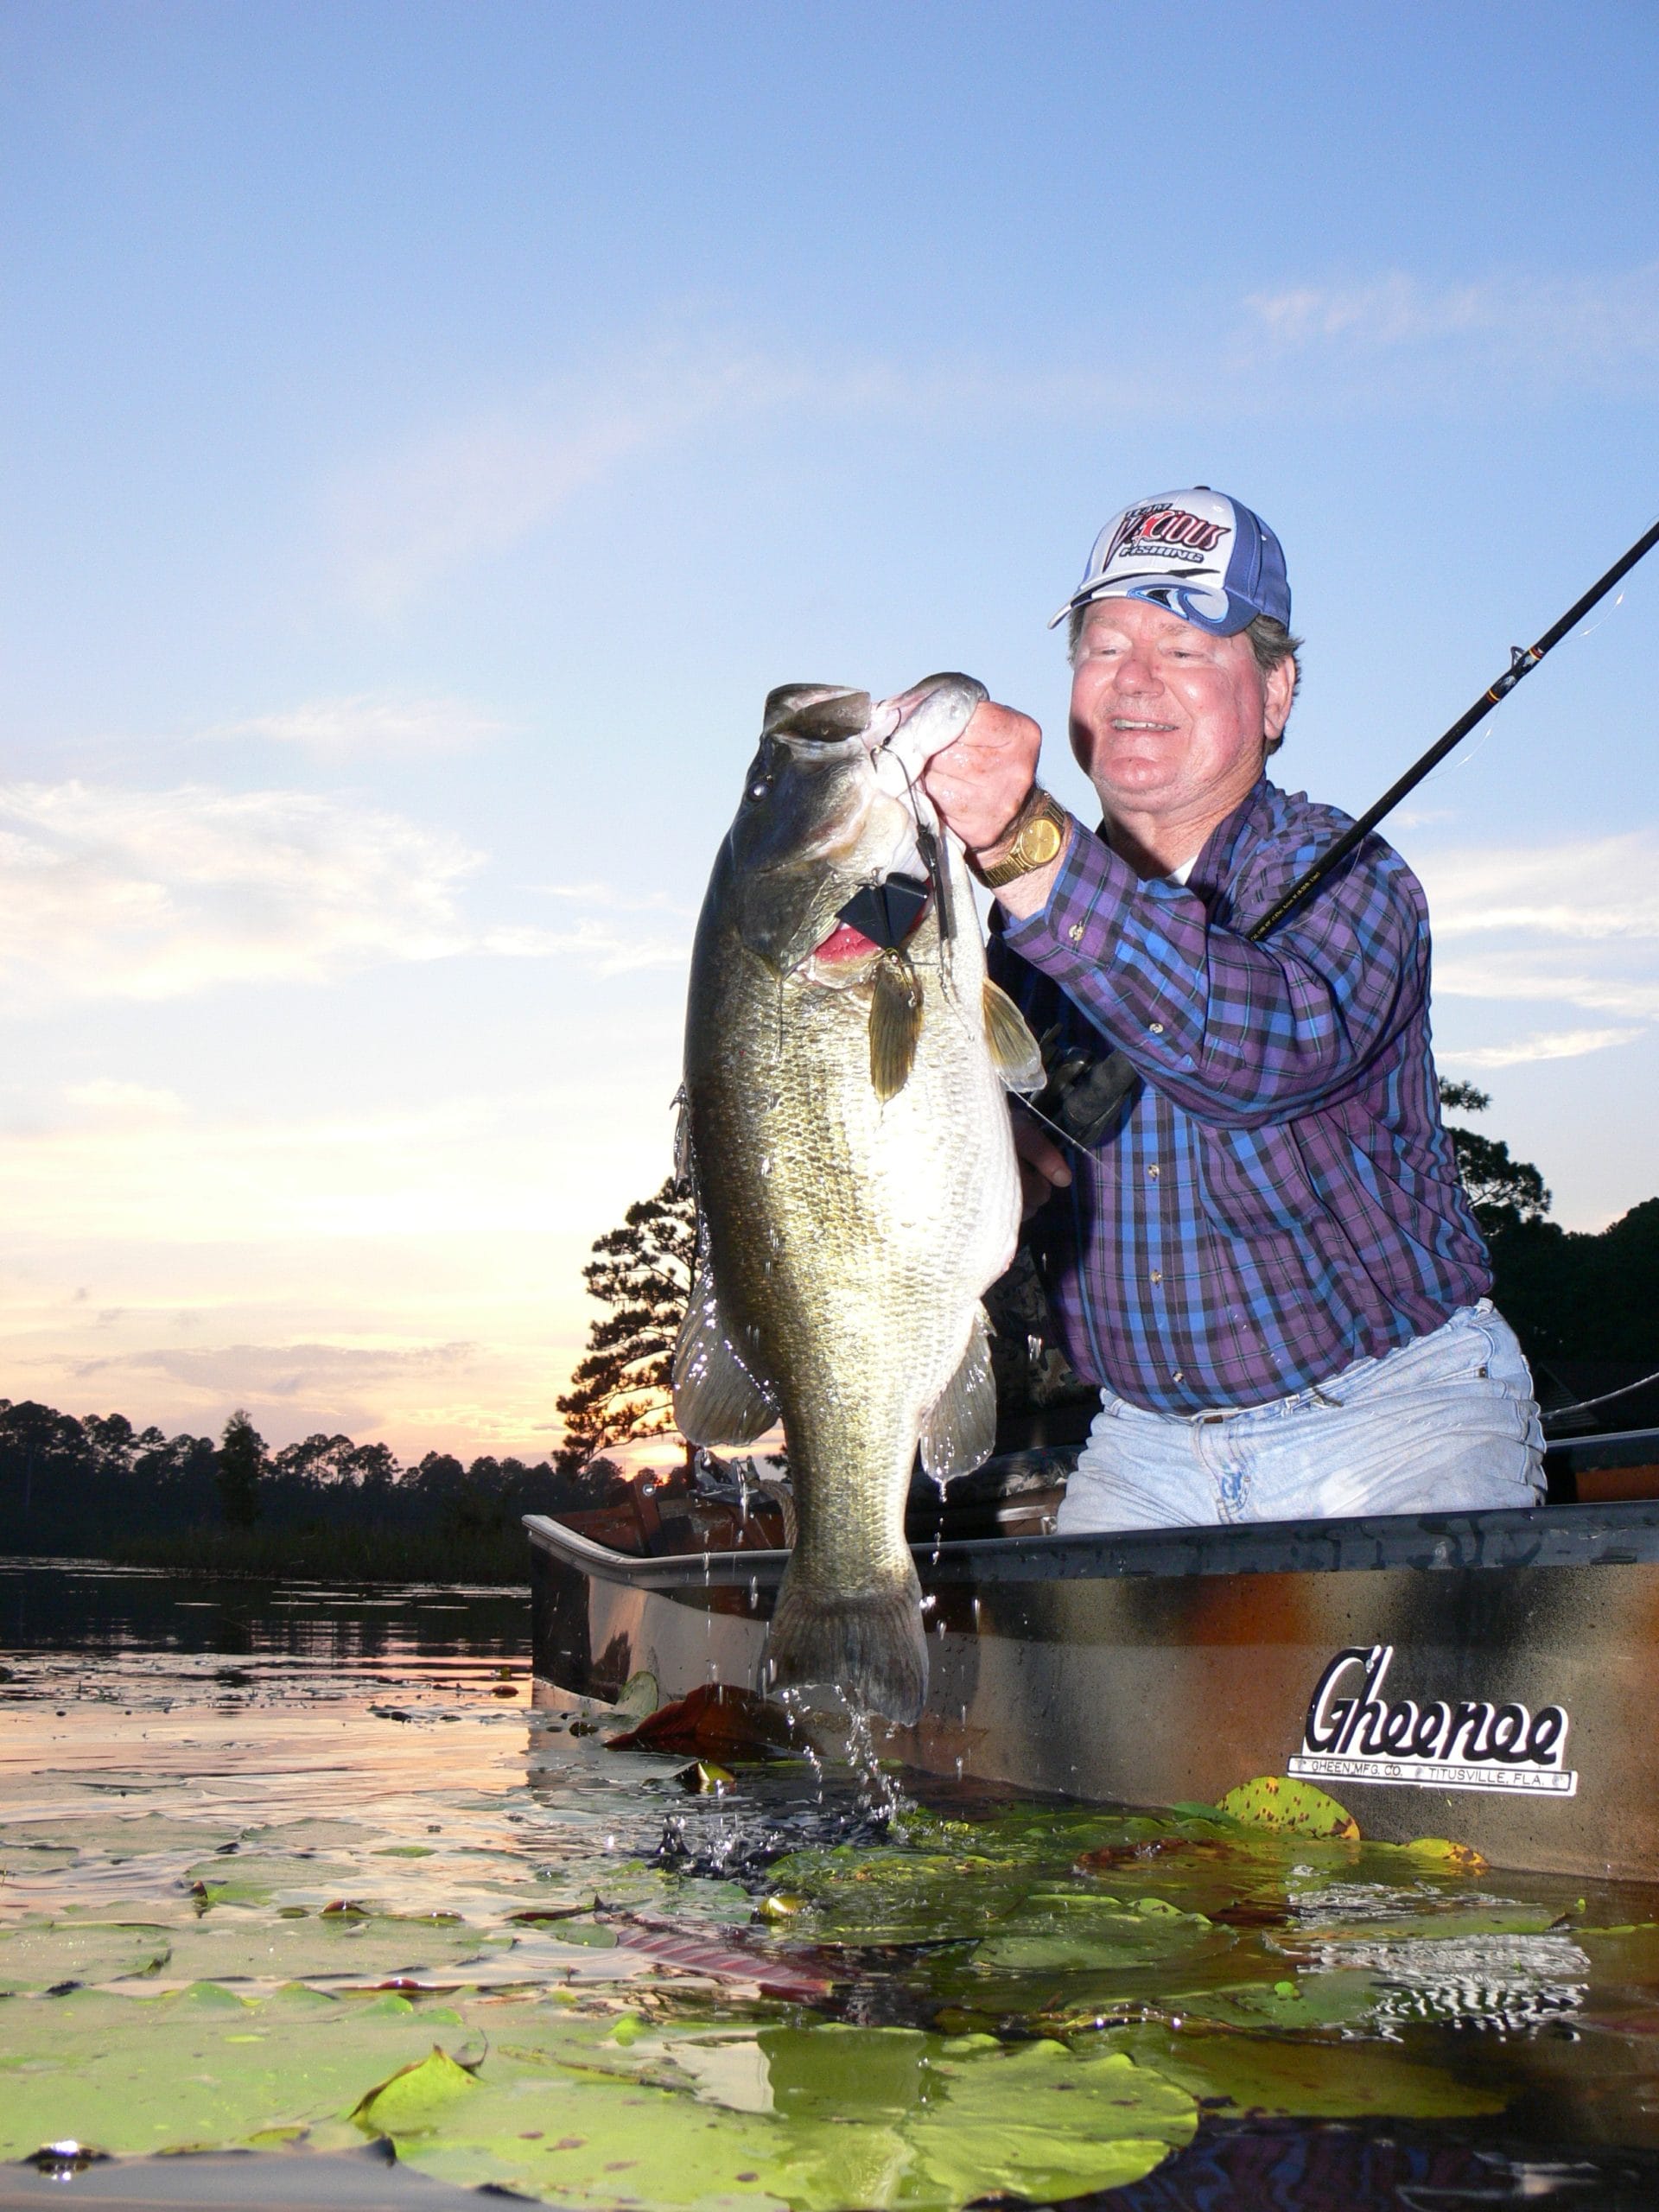 Pat Cullen was a master at catching giant largemouth bass. His simple yet effective approach targeted the biggest bass in a lake, and it worked.